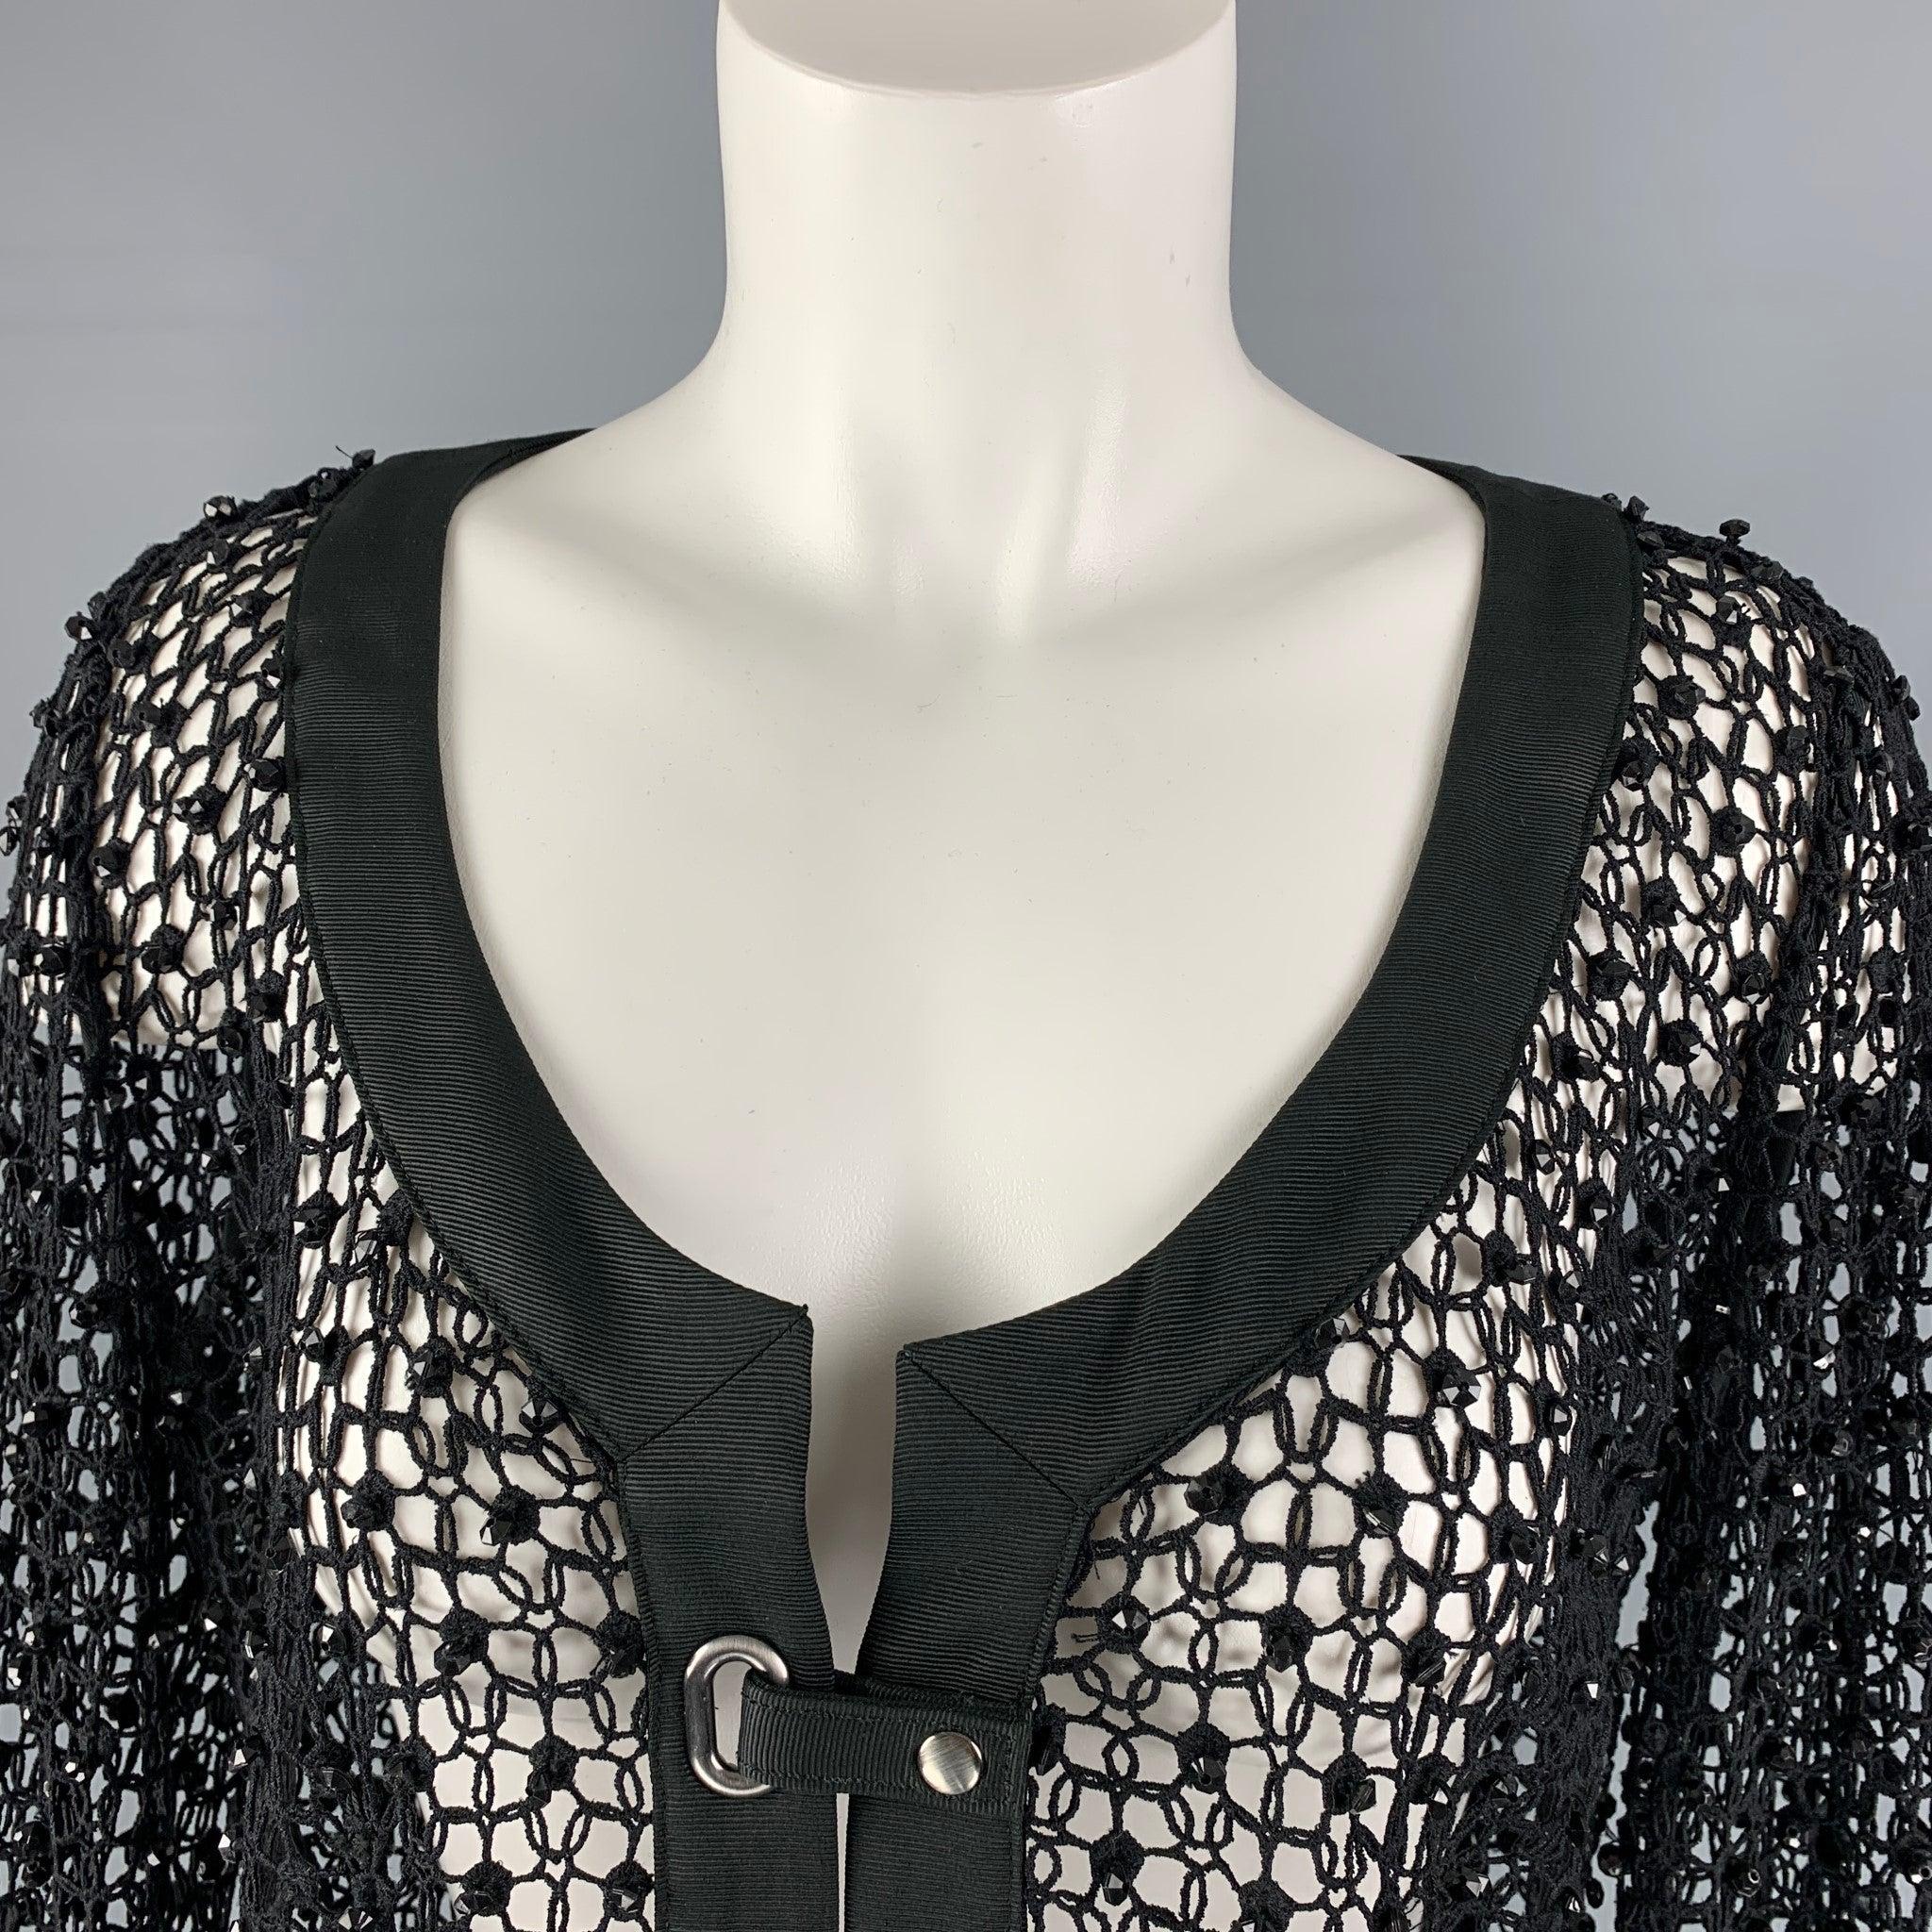 ARMANI COLLEZIONI jacket comes in black mesh fabric, scoop neck, cross over snap button closure and black beaded sequins. Made in Italy.
Excellent Pre-Owned Condition. Fabric Tag Removed. 

Marked:   10 

Measurements: 
 
Shoulder: 15 inches